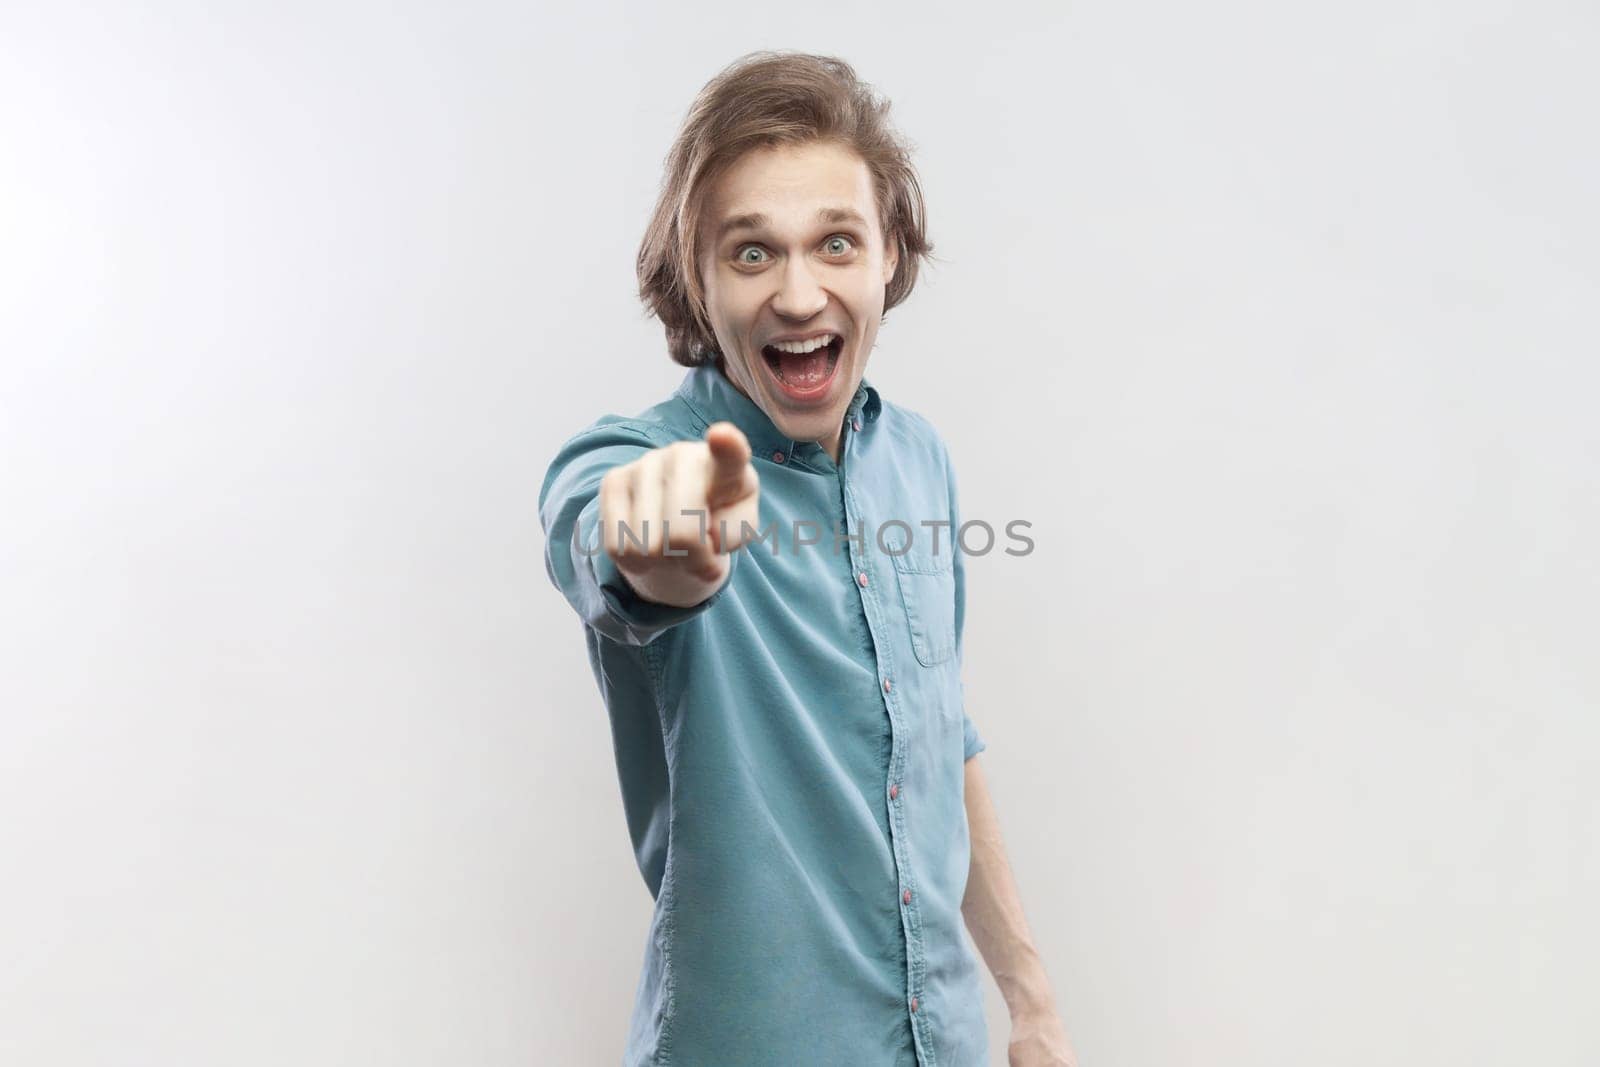 Portrait of surprised astonished shocked young man standing pointing at camera, selecting you, expressing positive emotions, wearing blue shirt. Indoor studio shot isolated on gray background.